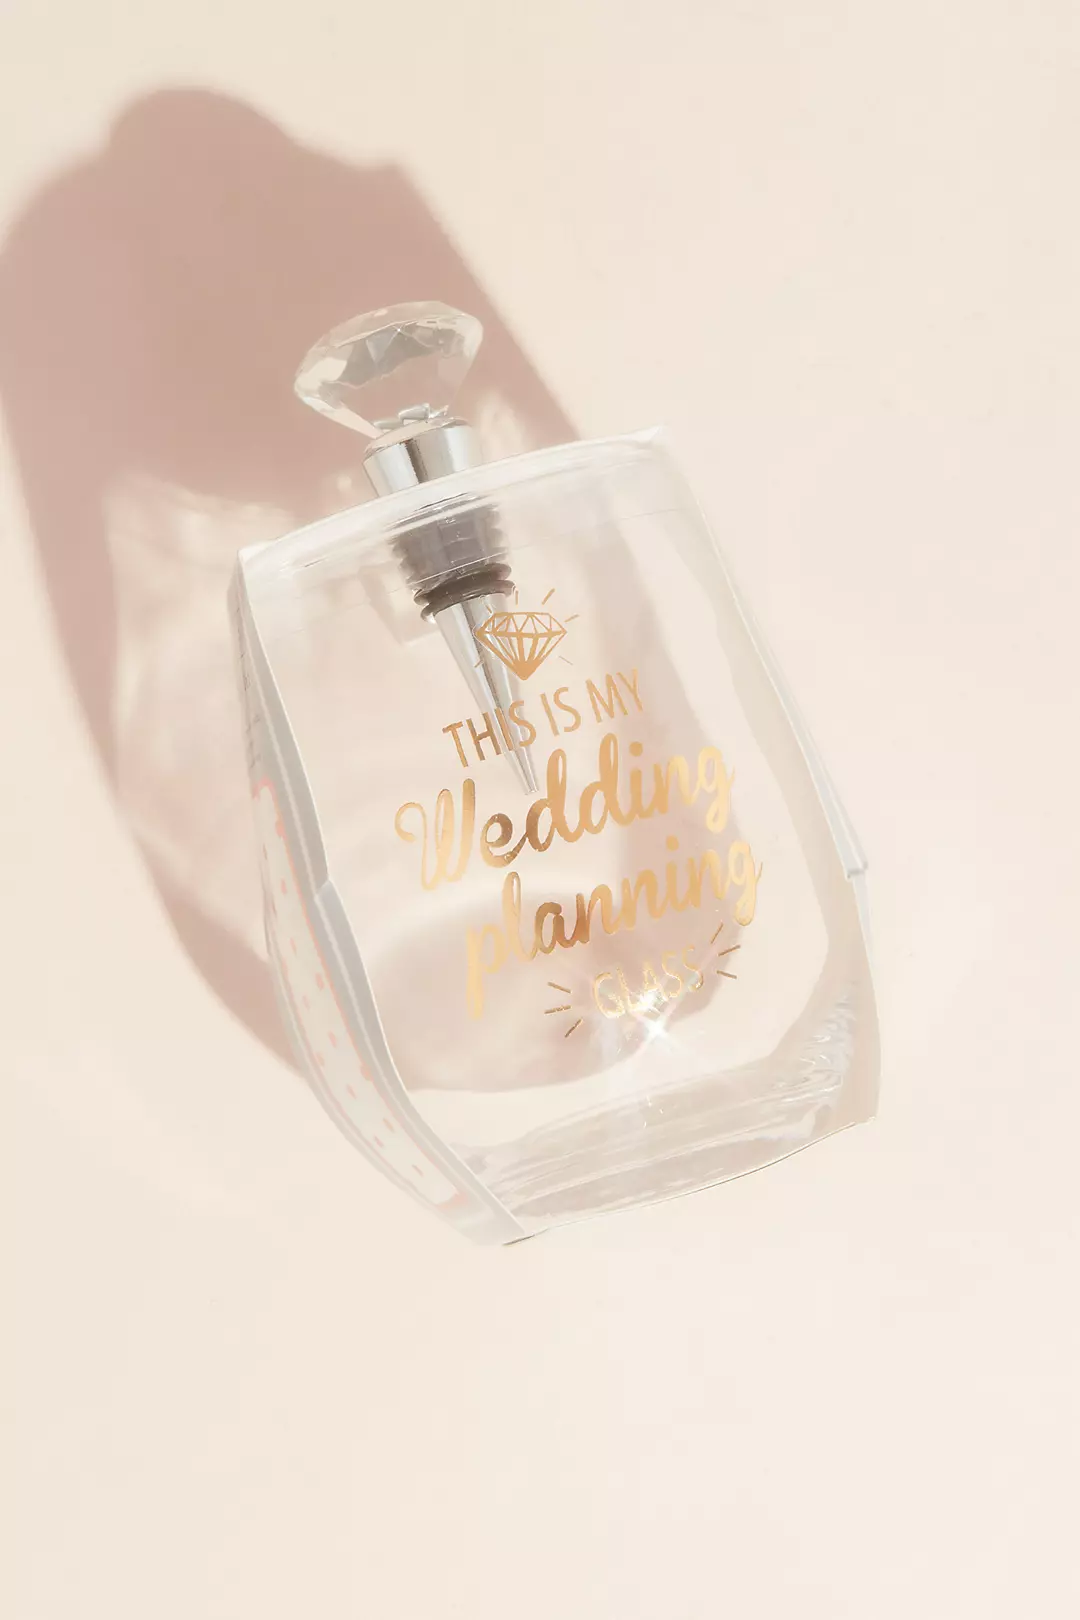 Wedding Planning Glass with Diamond Bottle Stopper Image